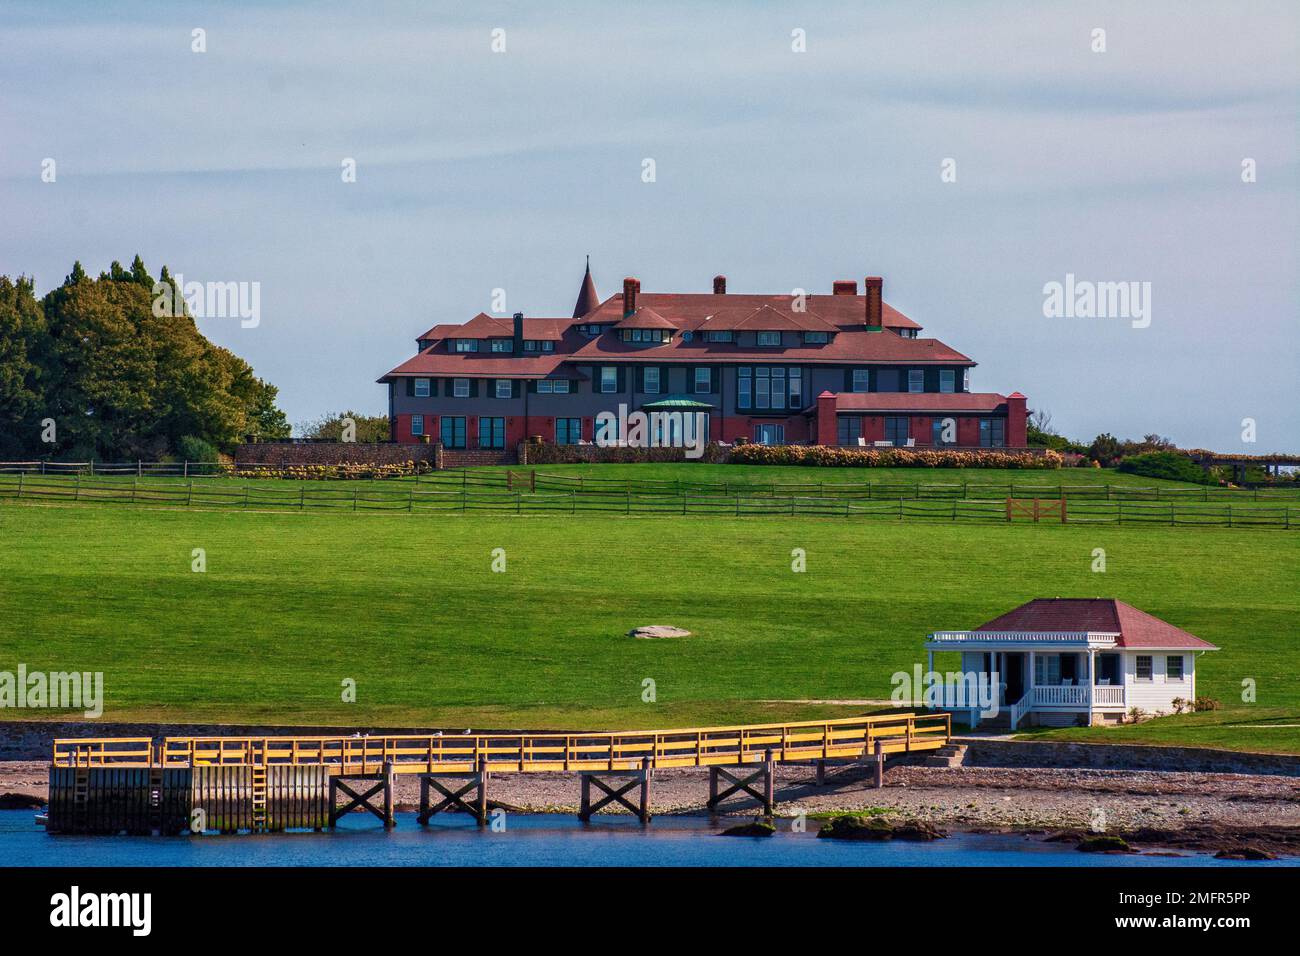 Light Houses, Yacht Clubs, Elegant Homes are just the icing on the cake for this area of New England, USA Stock Photo